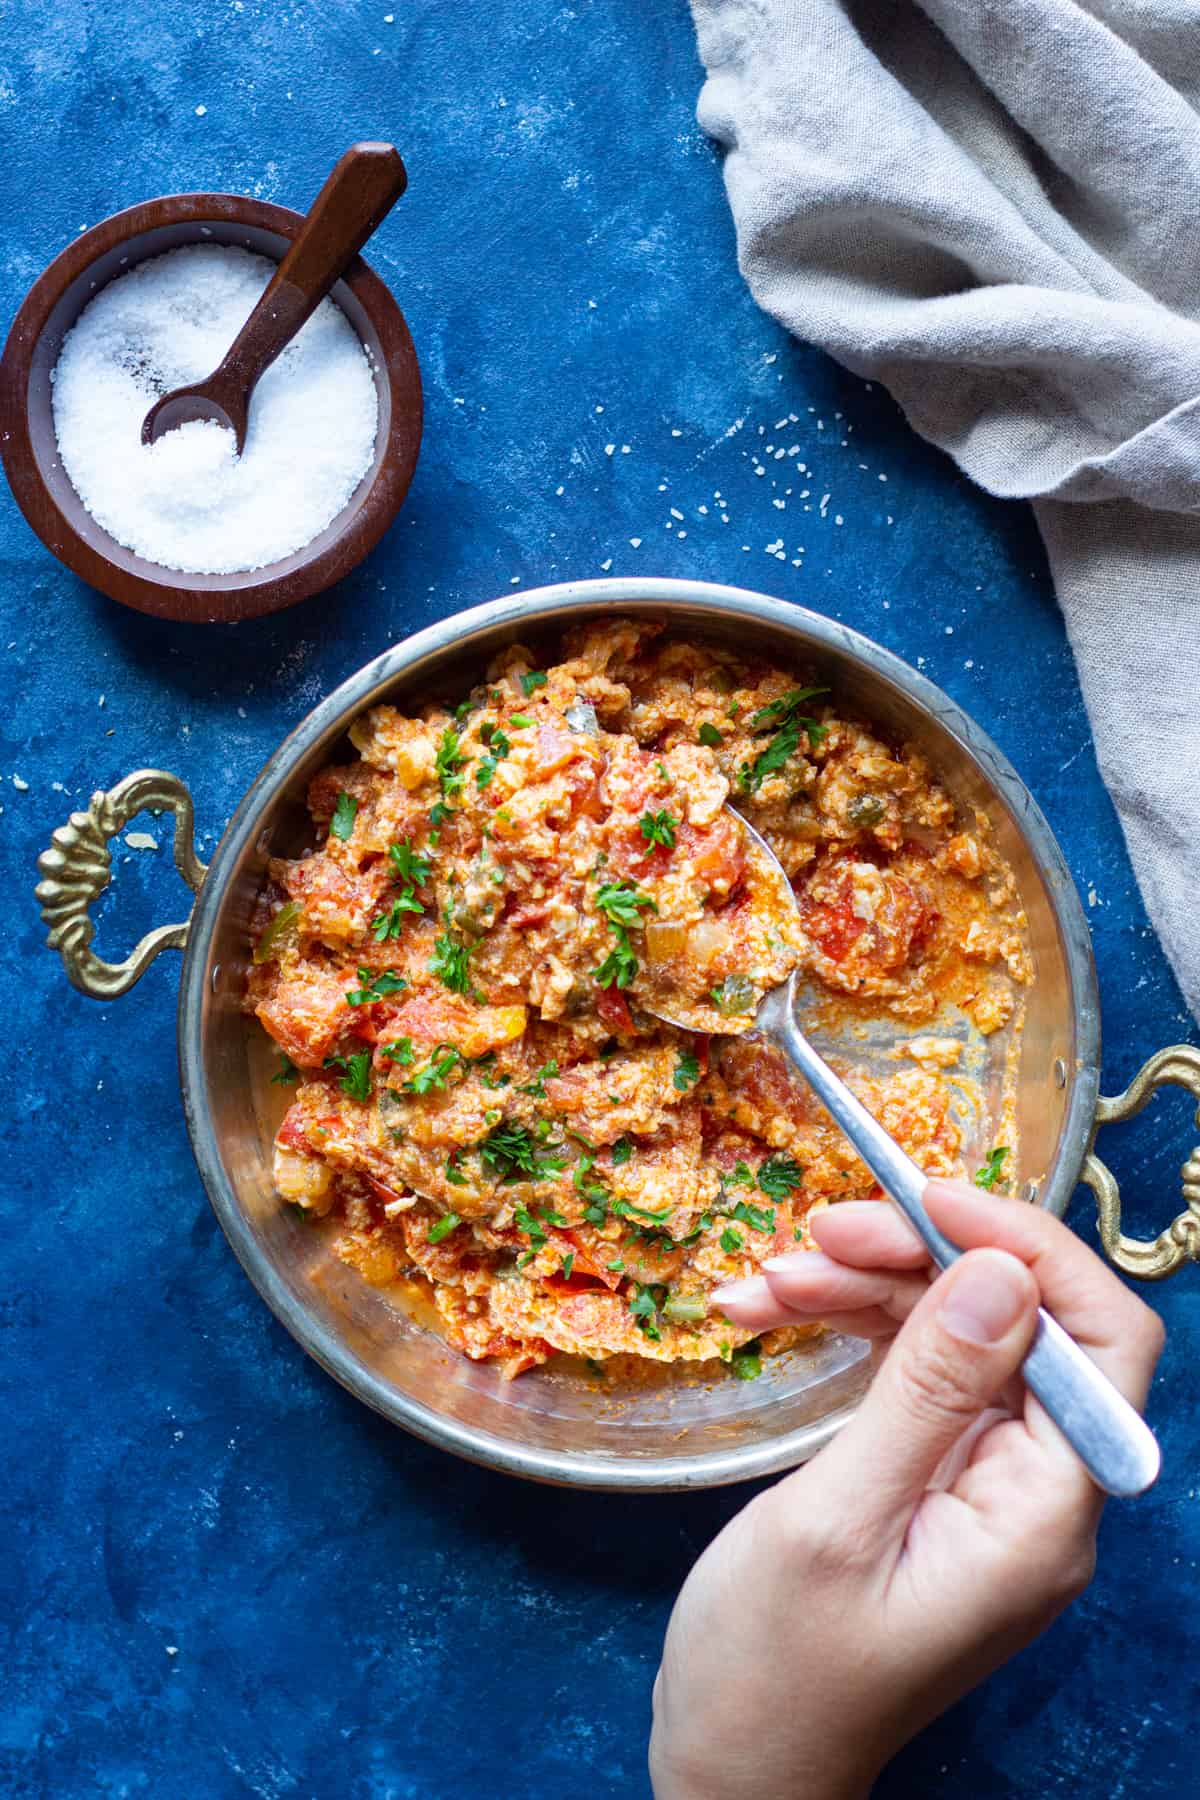 Menemen is a traditional Turkish breakfast recipe made with tomatoes and eggs. Learn how to make menemen at home with a few ingredients